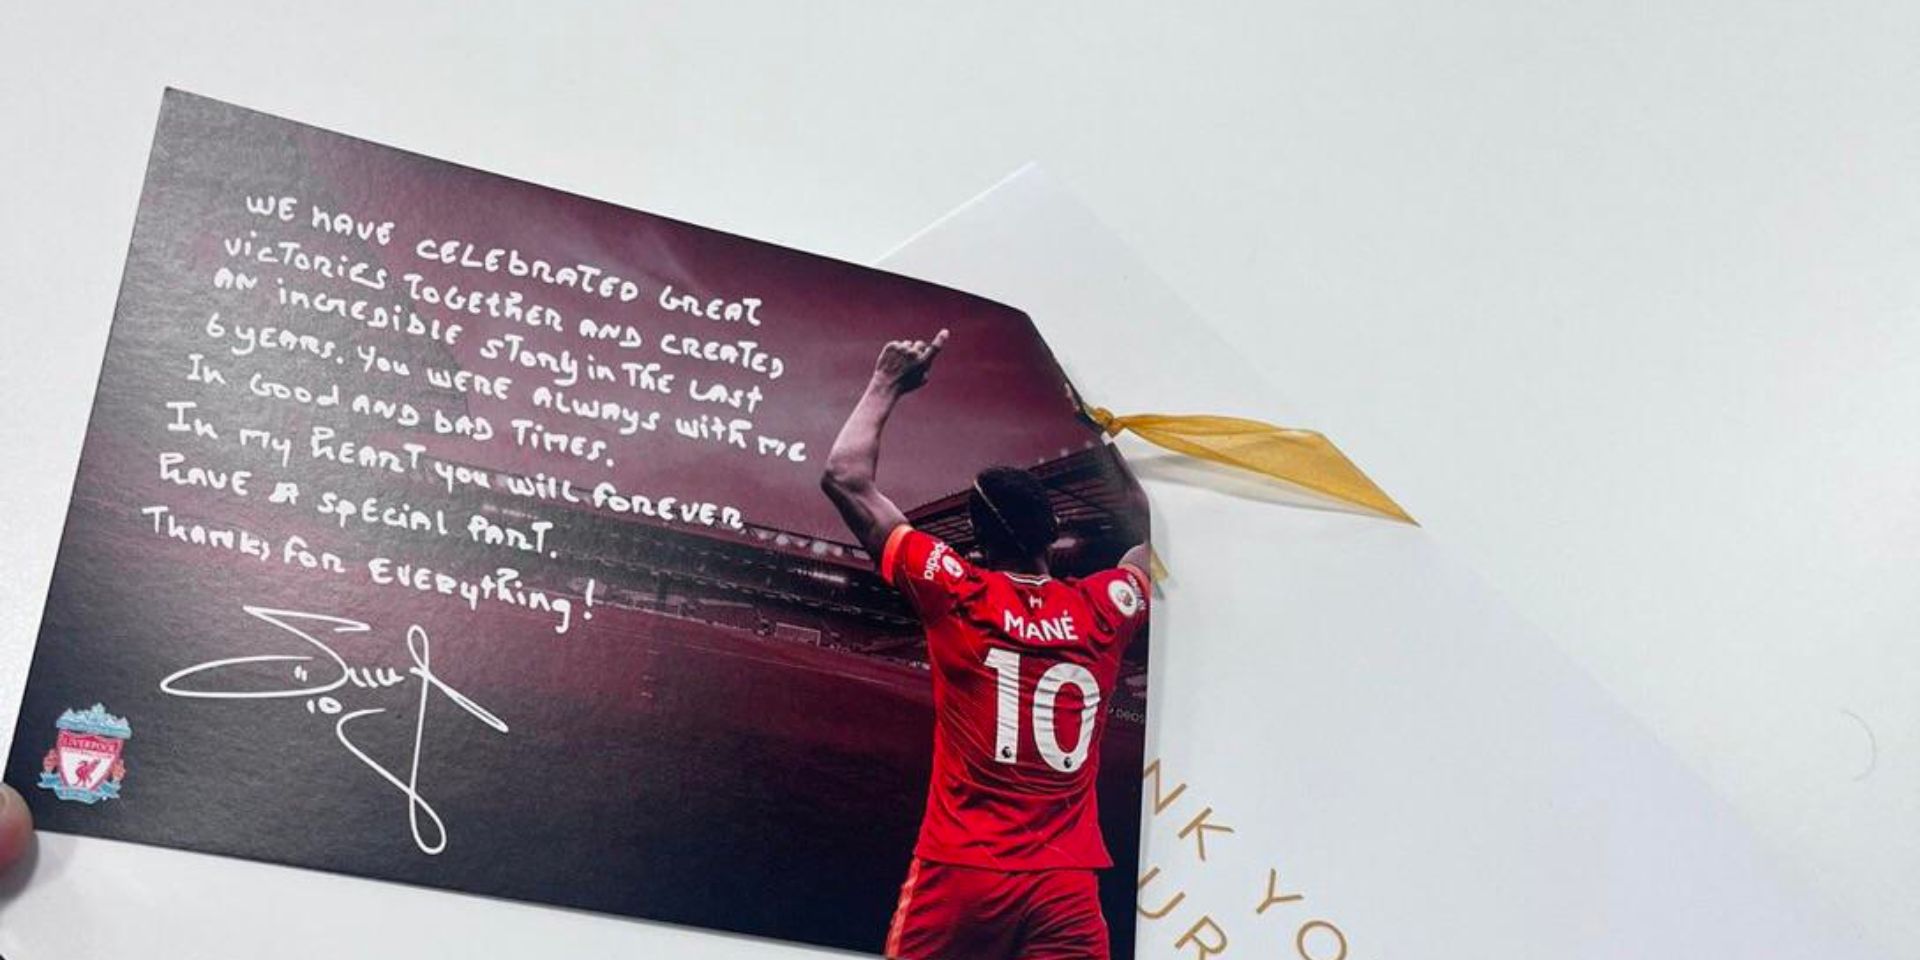 (Image) ‘You were always with me’ – The gift that Sadio Mane sent to 150 members of Liverpool staff has been revealed online